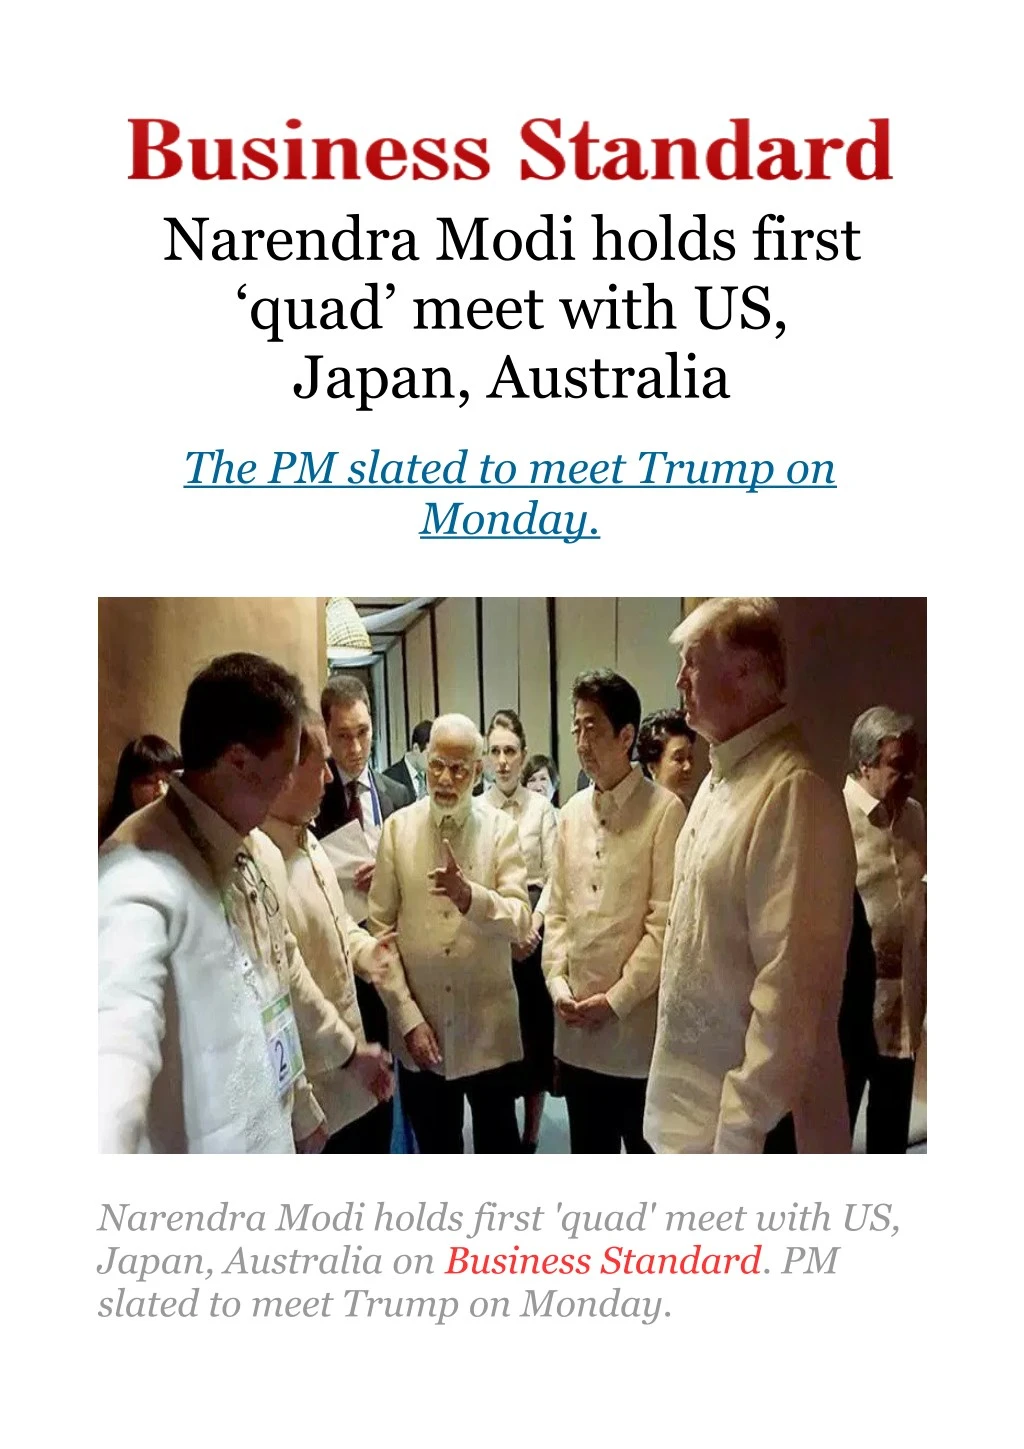 narendra modi holds first quad meet with us japan